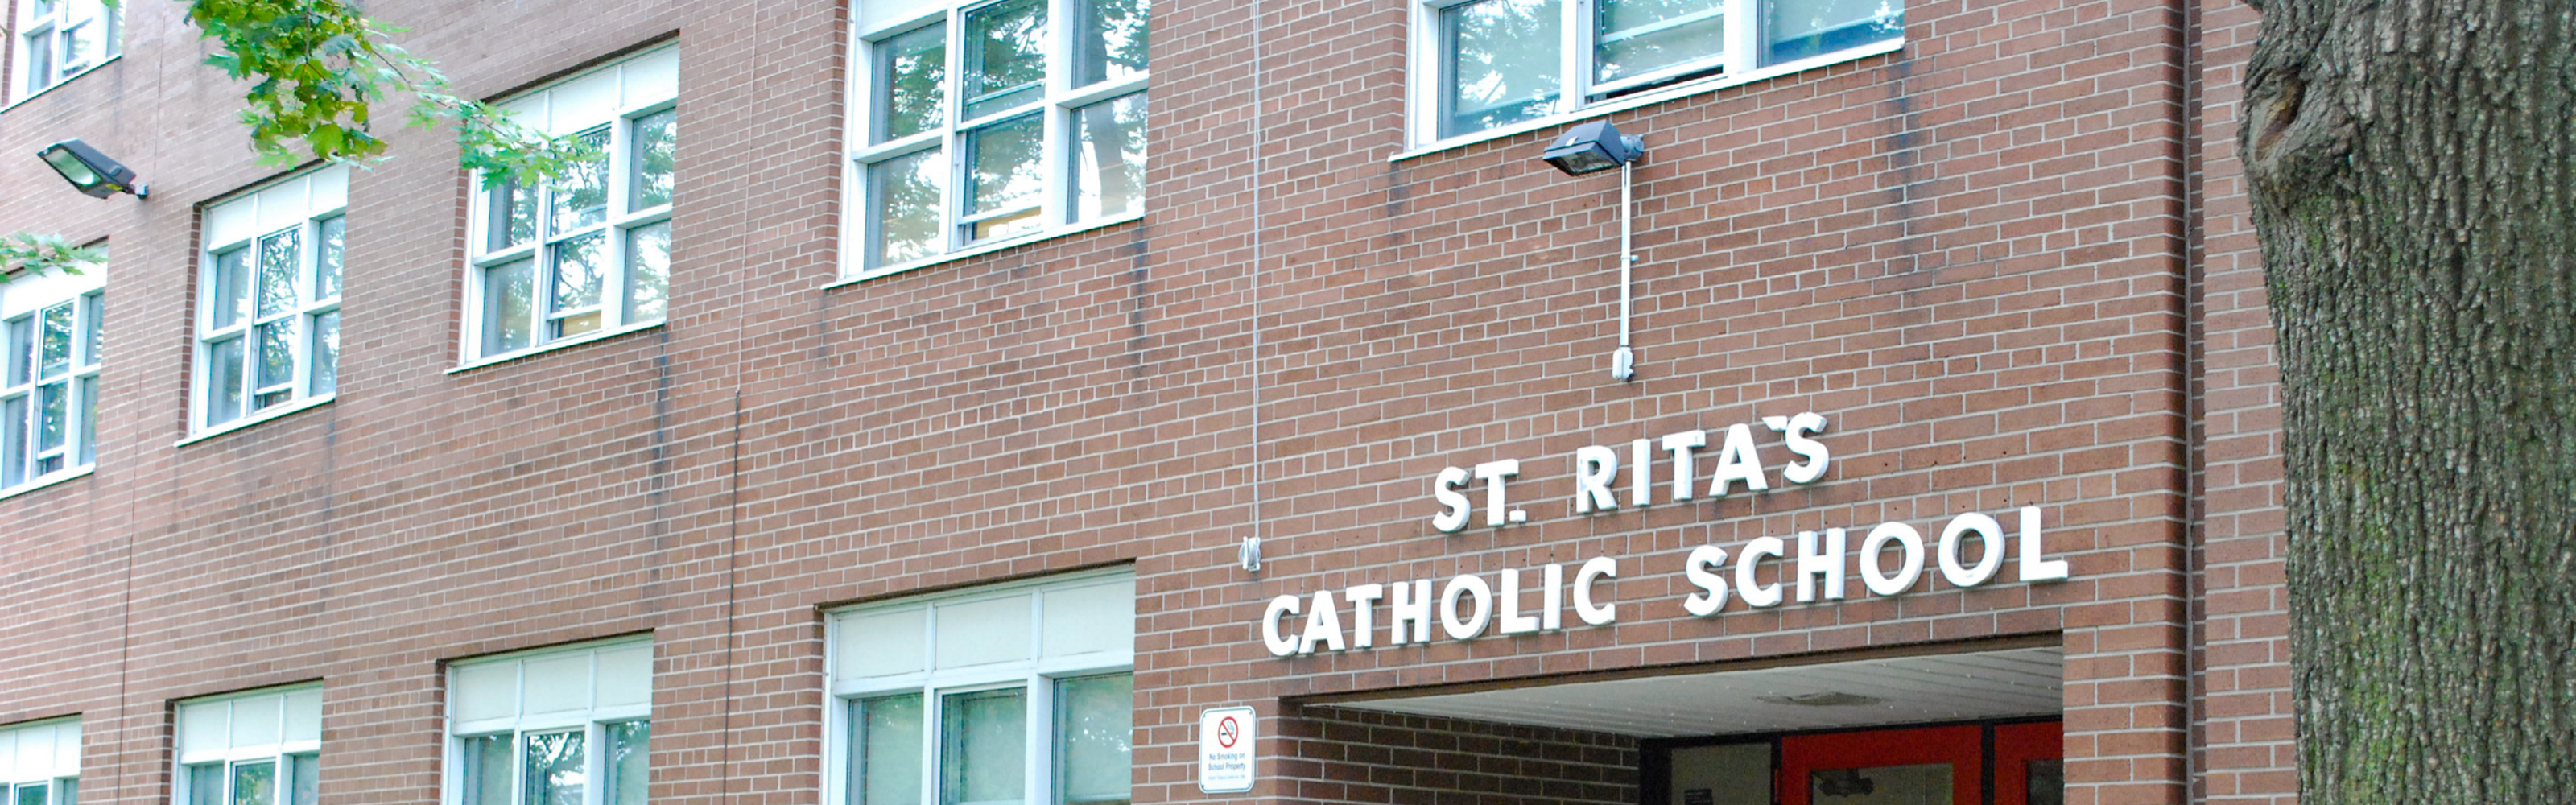 The front of the  St. Rita Catholic School building.